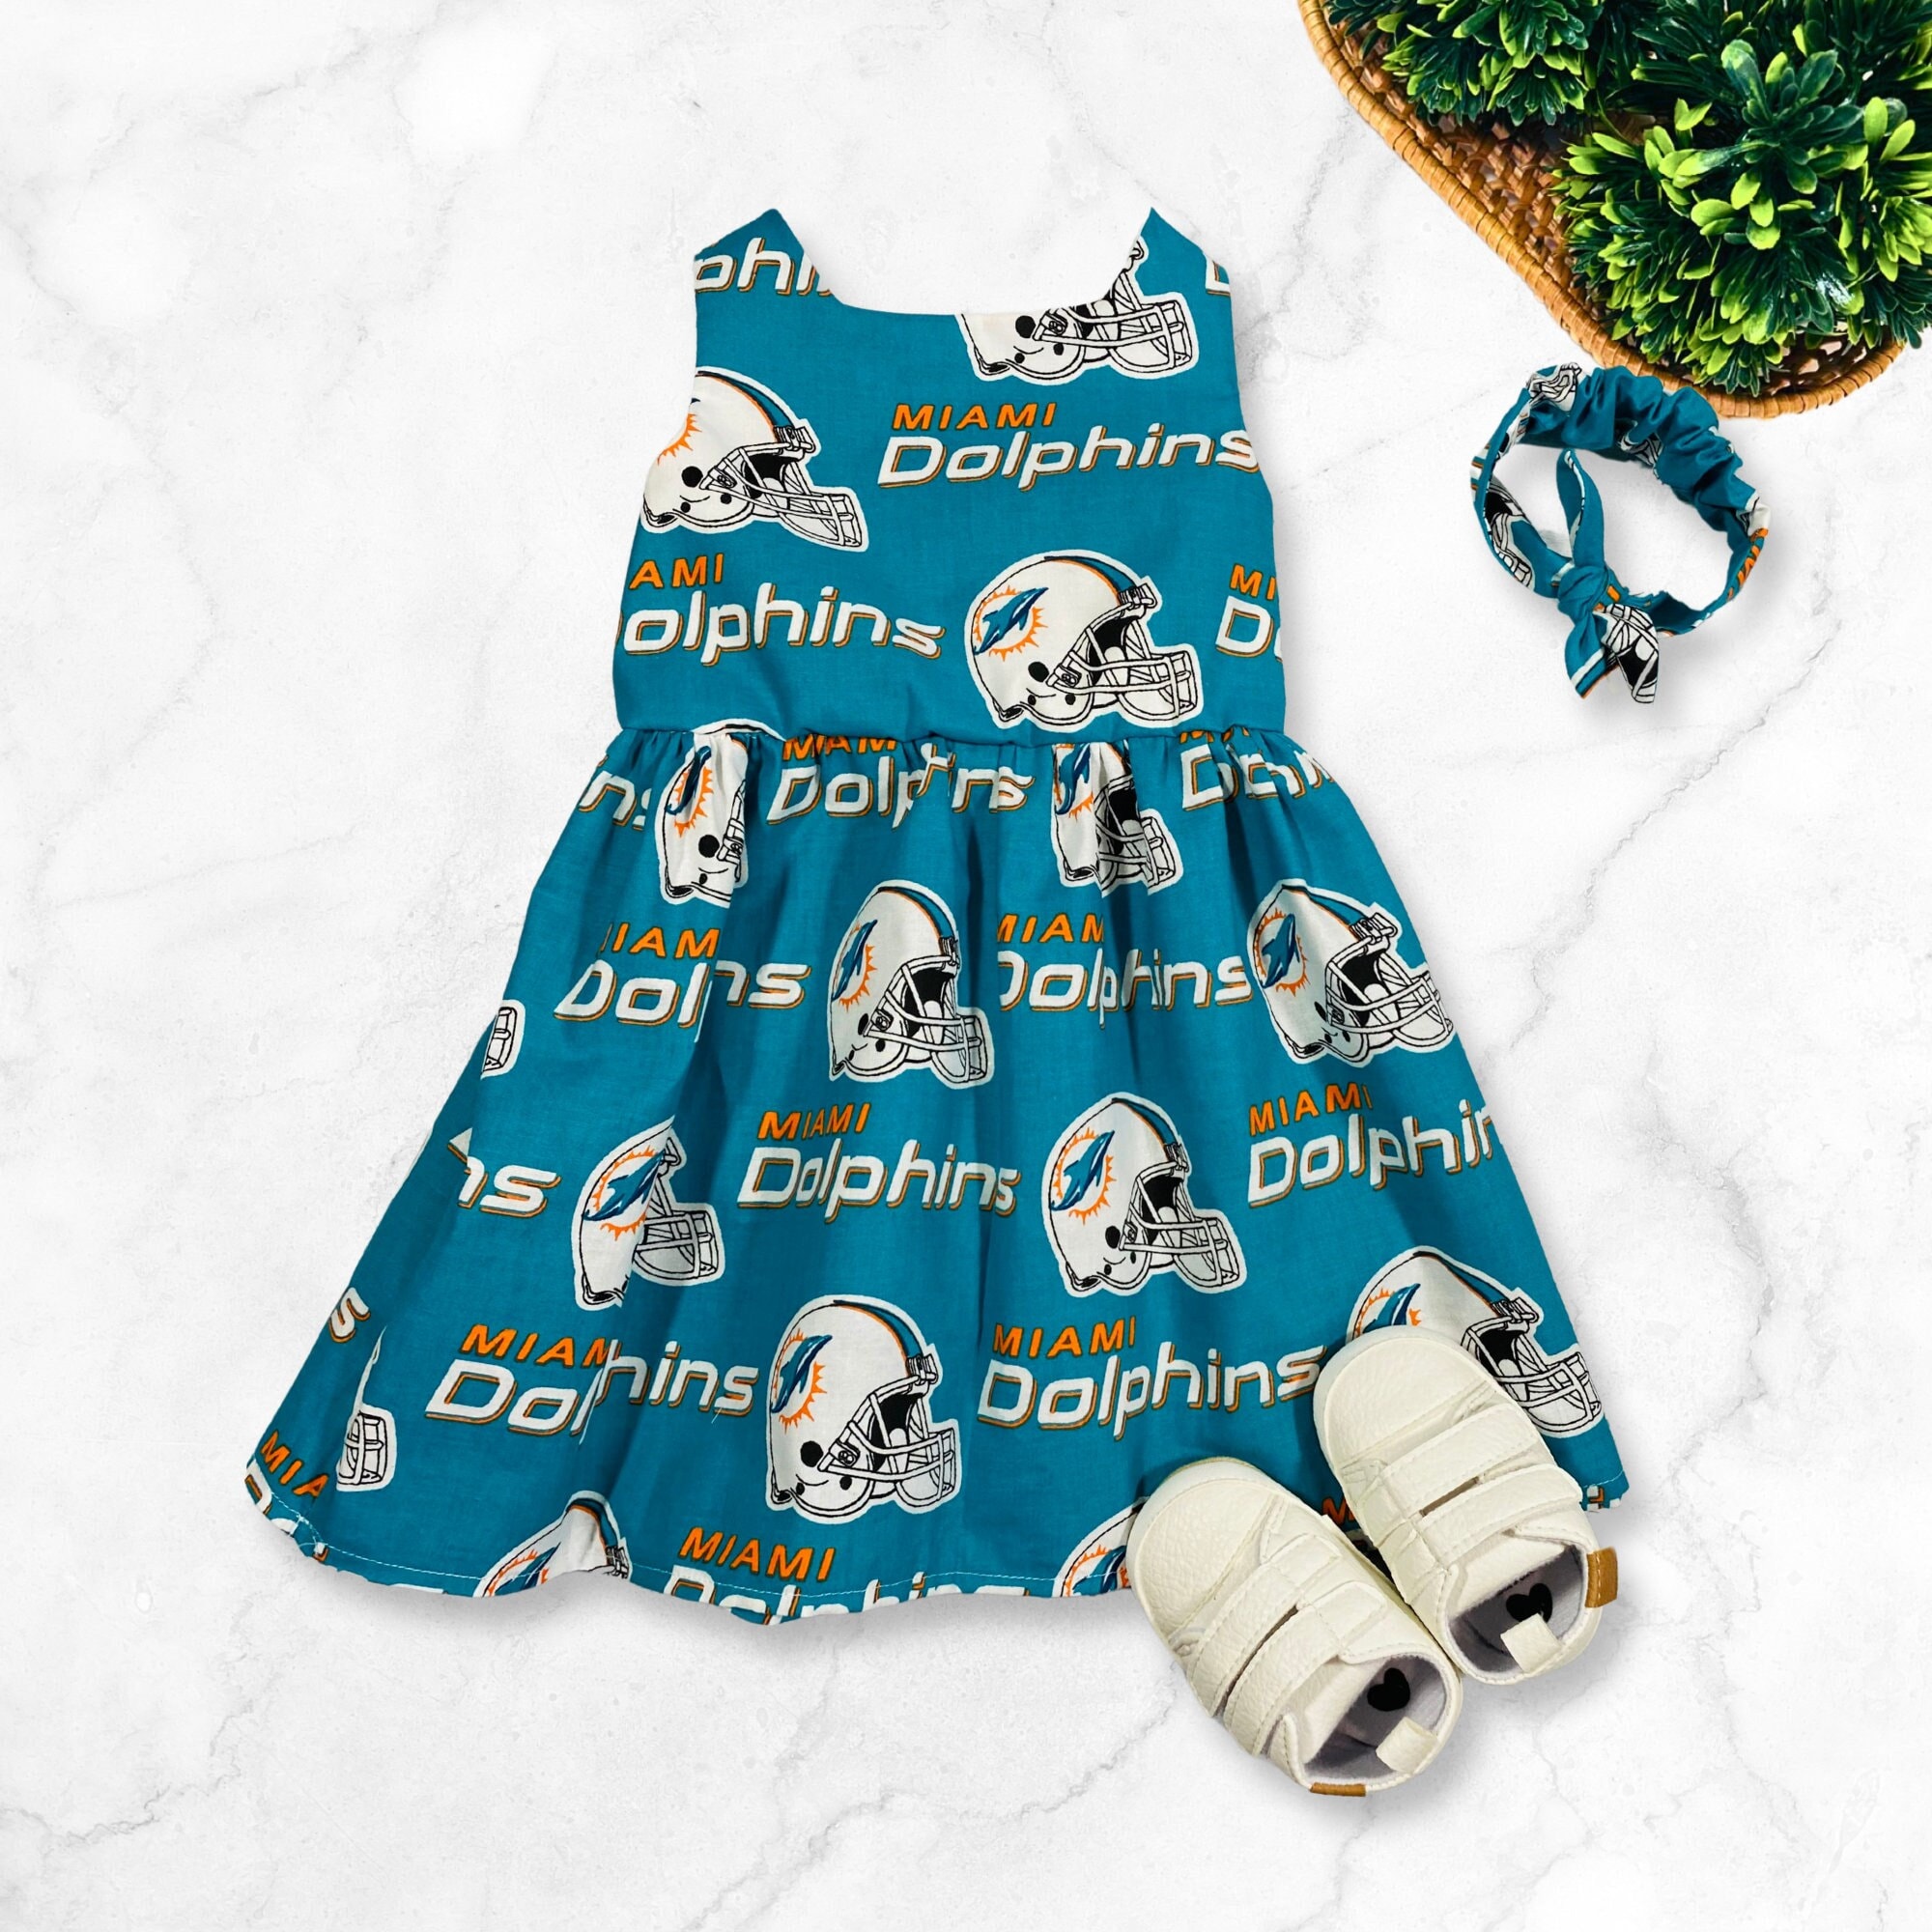 Dolphin brand dress material